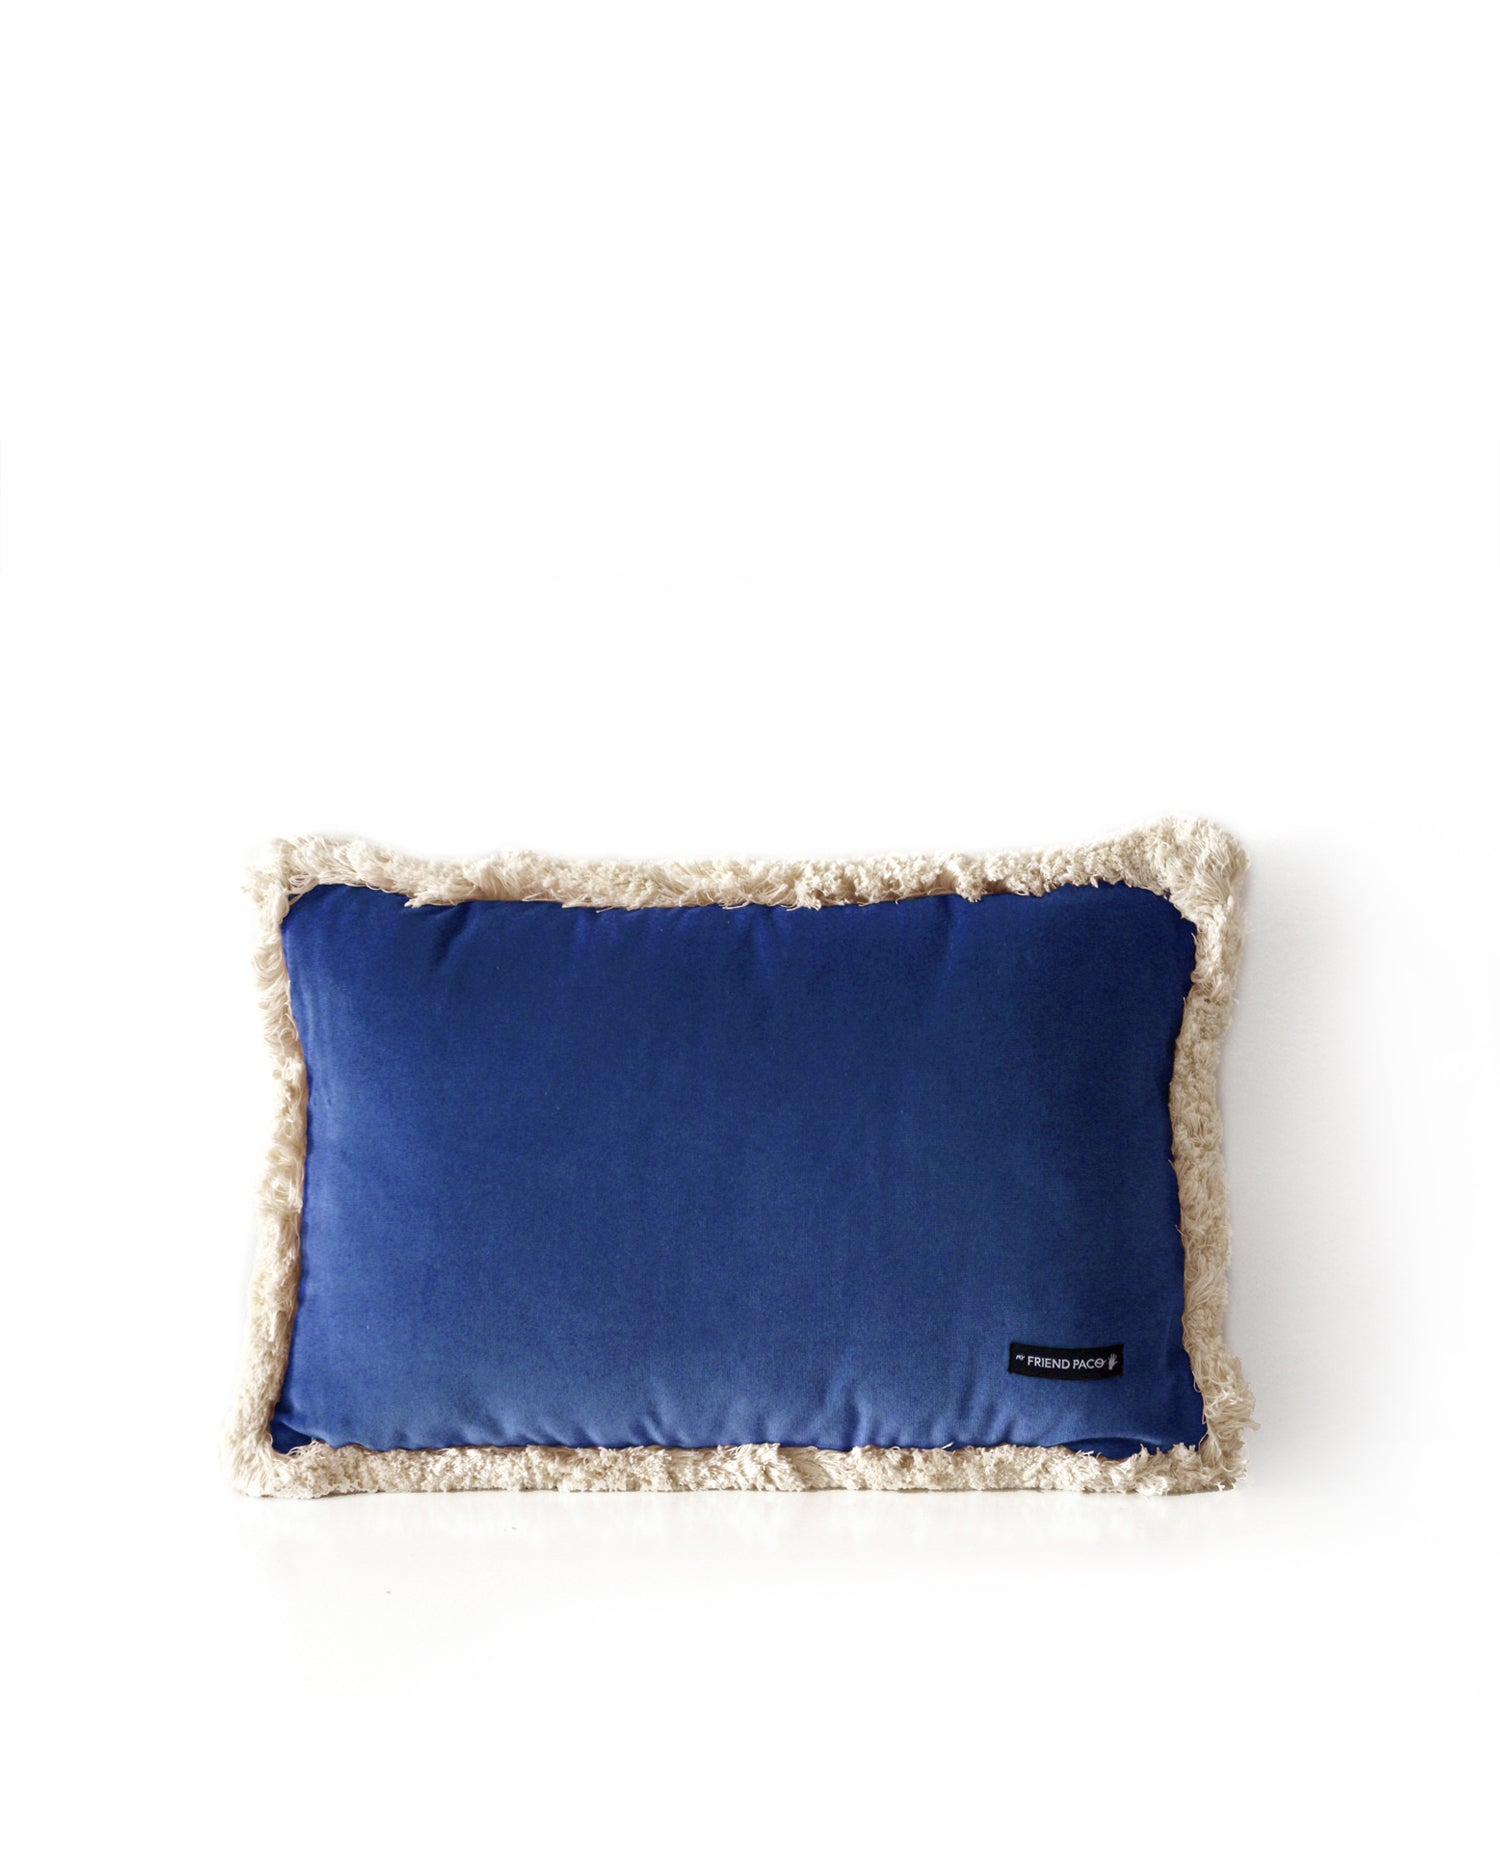 Luxury Velvet Pillow Blue handmade with cotton velvet by My Friend Paco home accessories